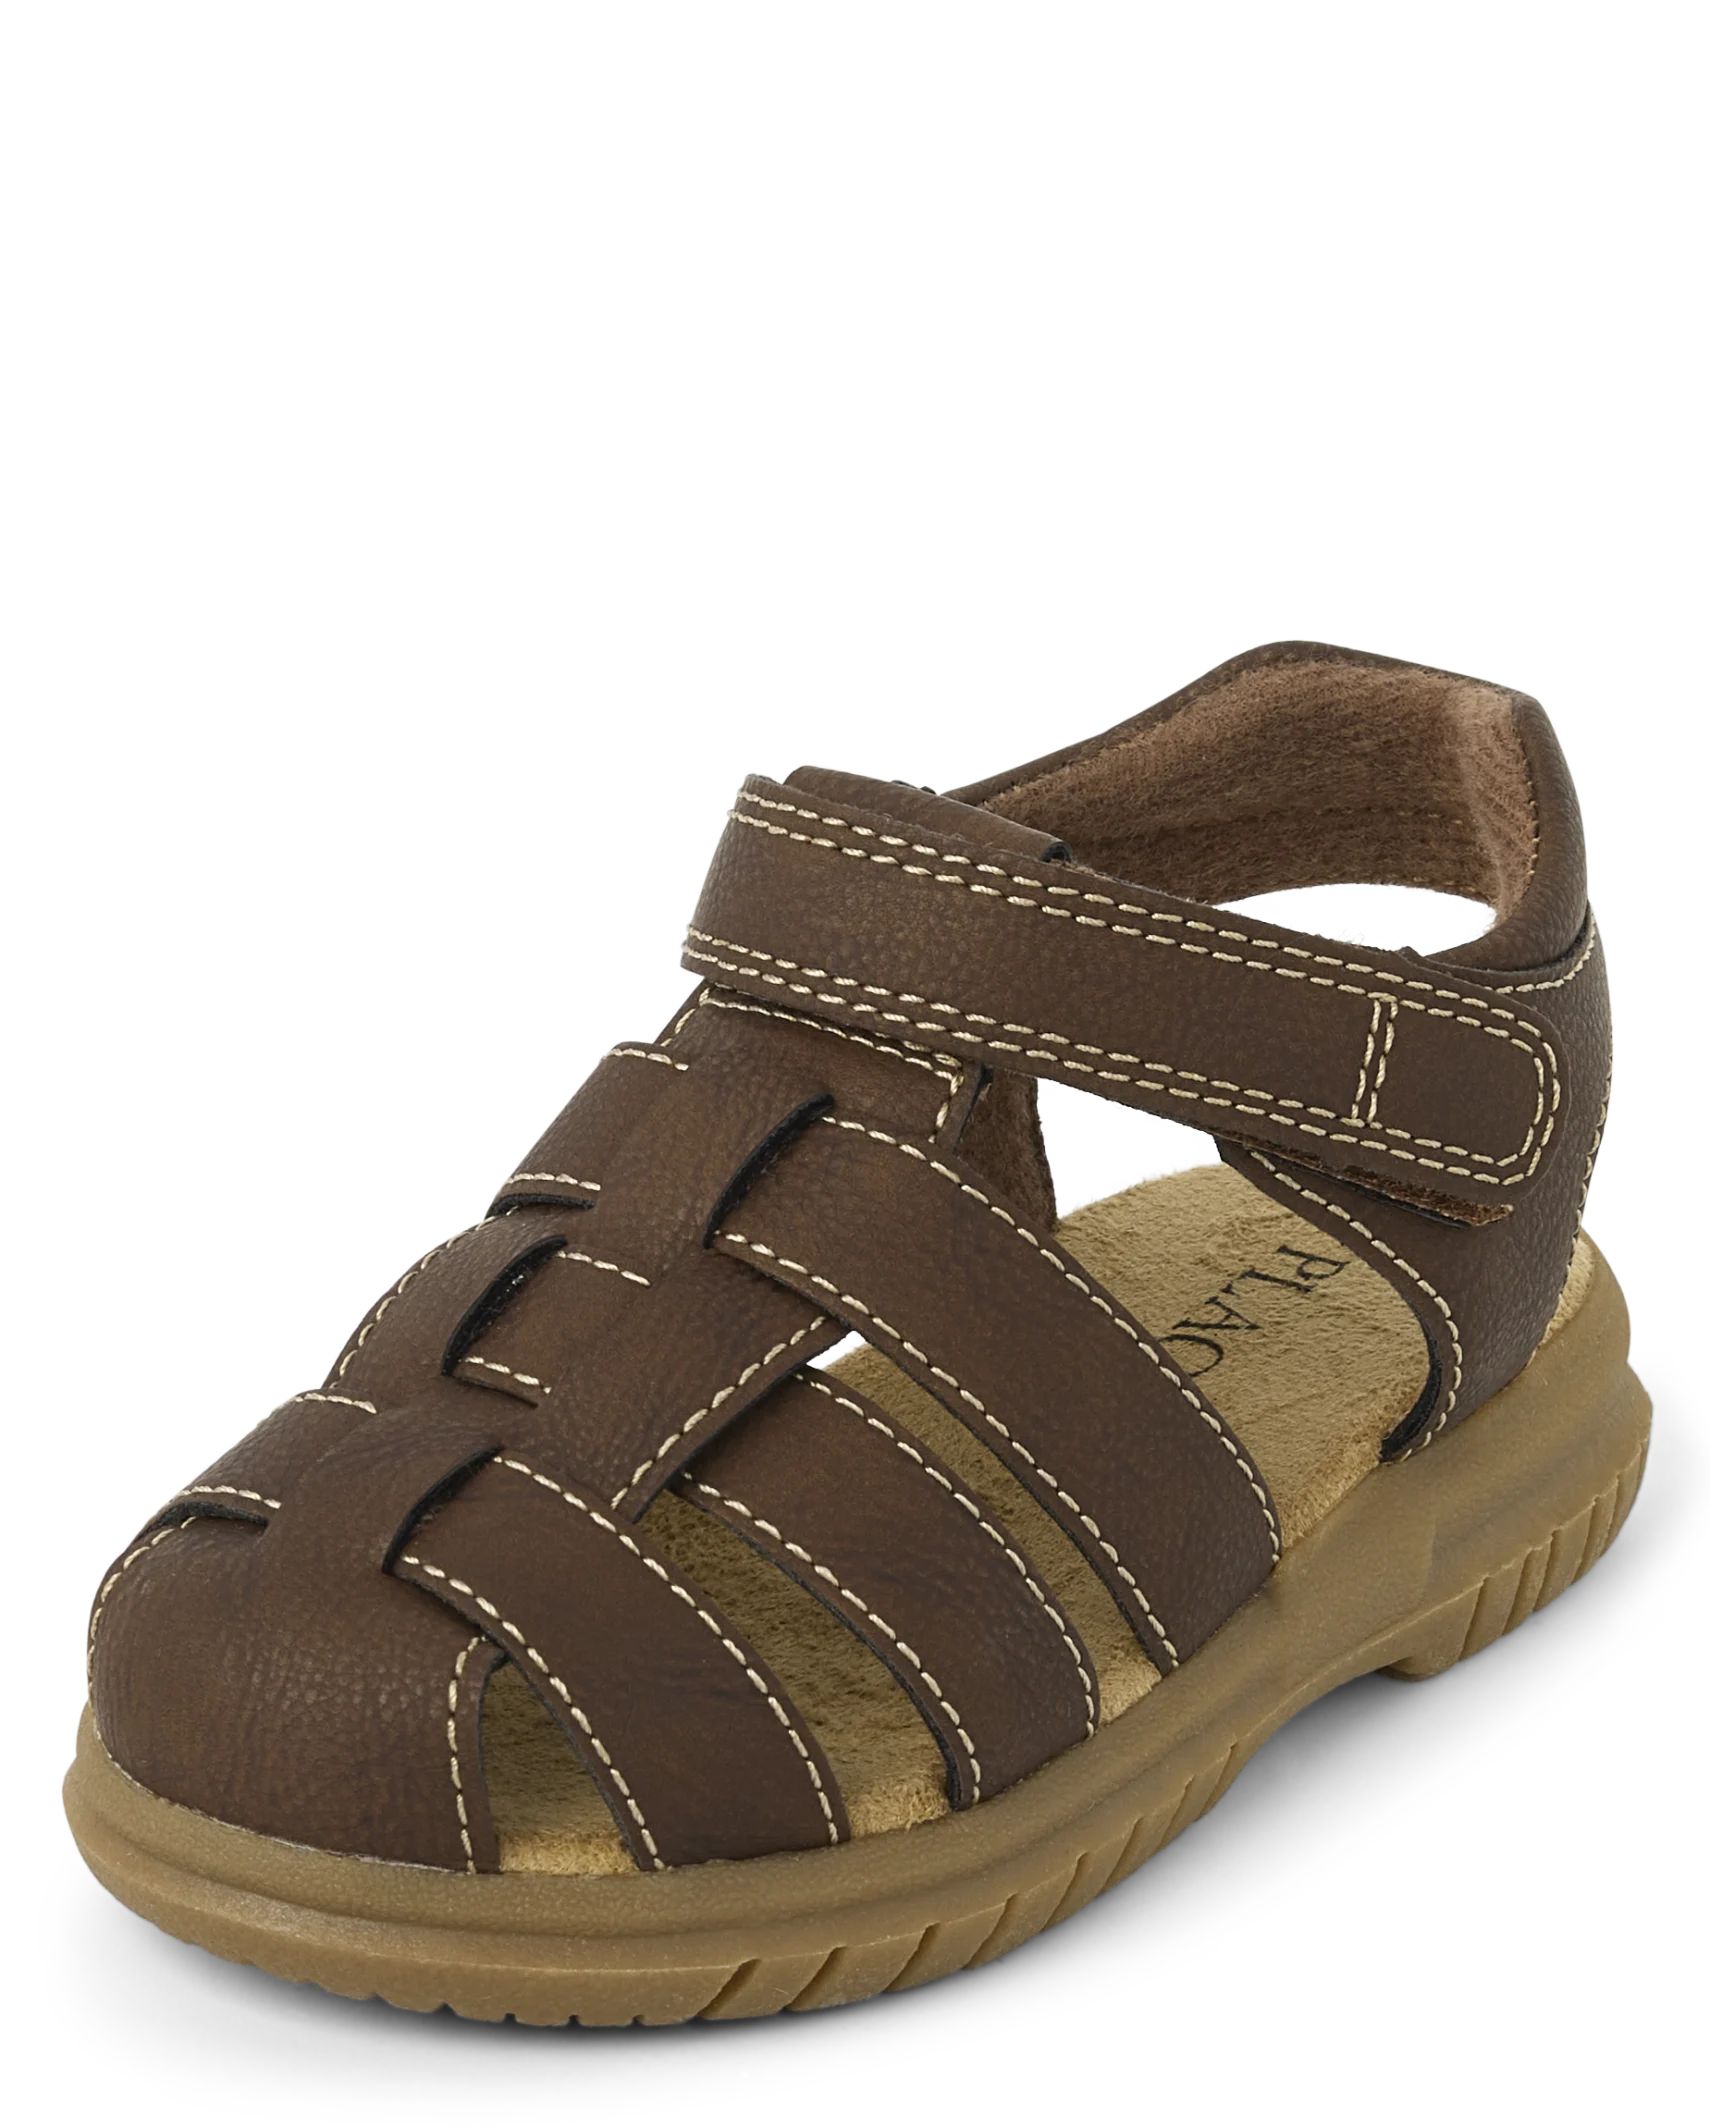 Toddler Boys Fisherman Sandals - brown | The Children's Place